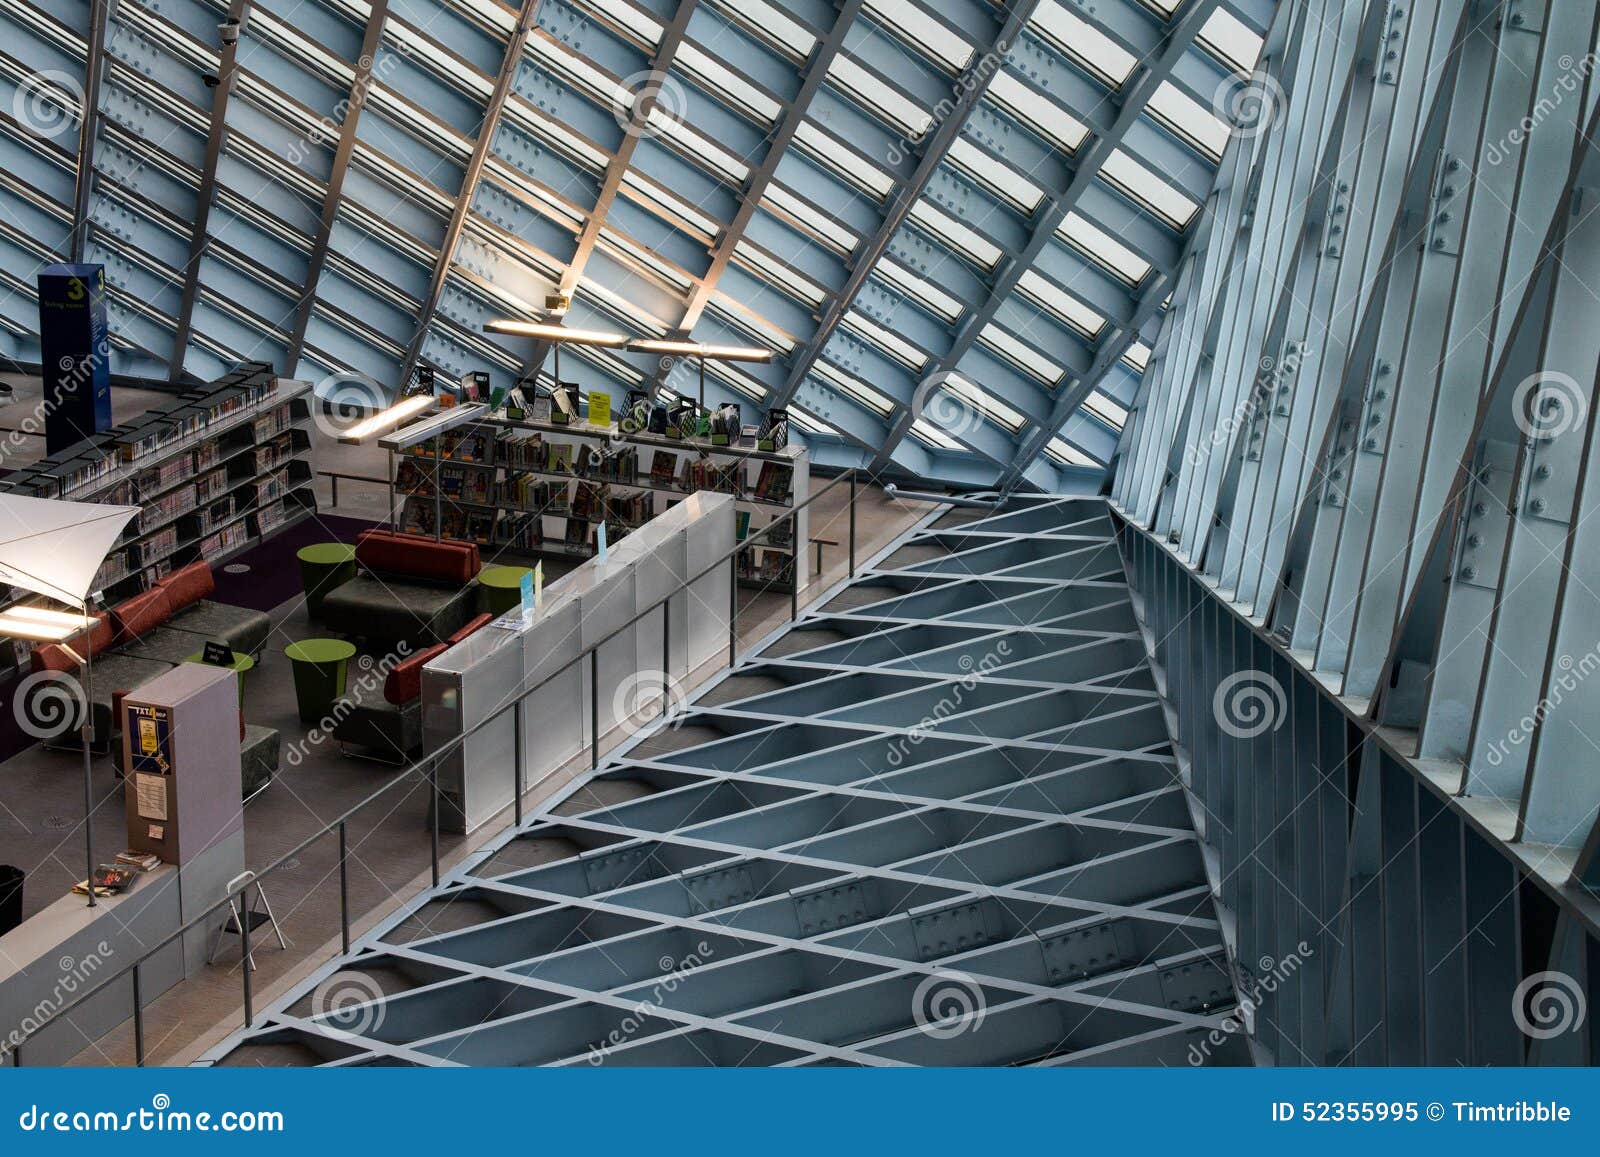 Seattle Public Library Interior Editorial Image Image Of